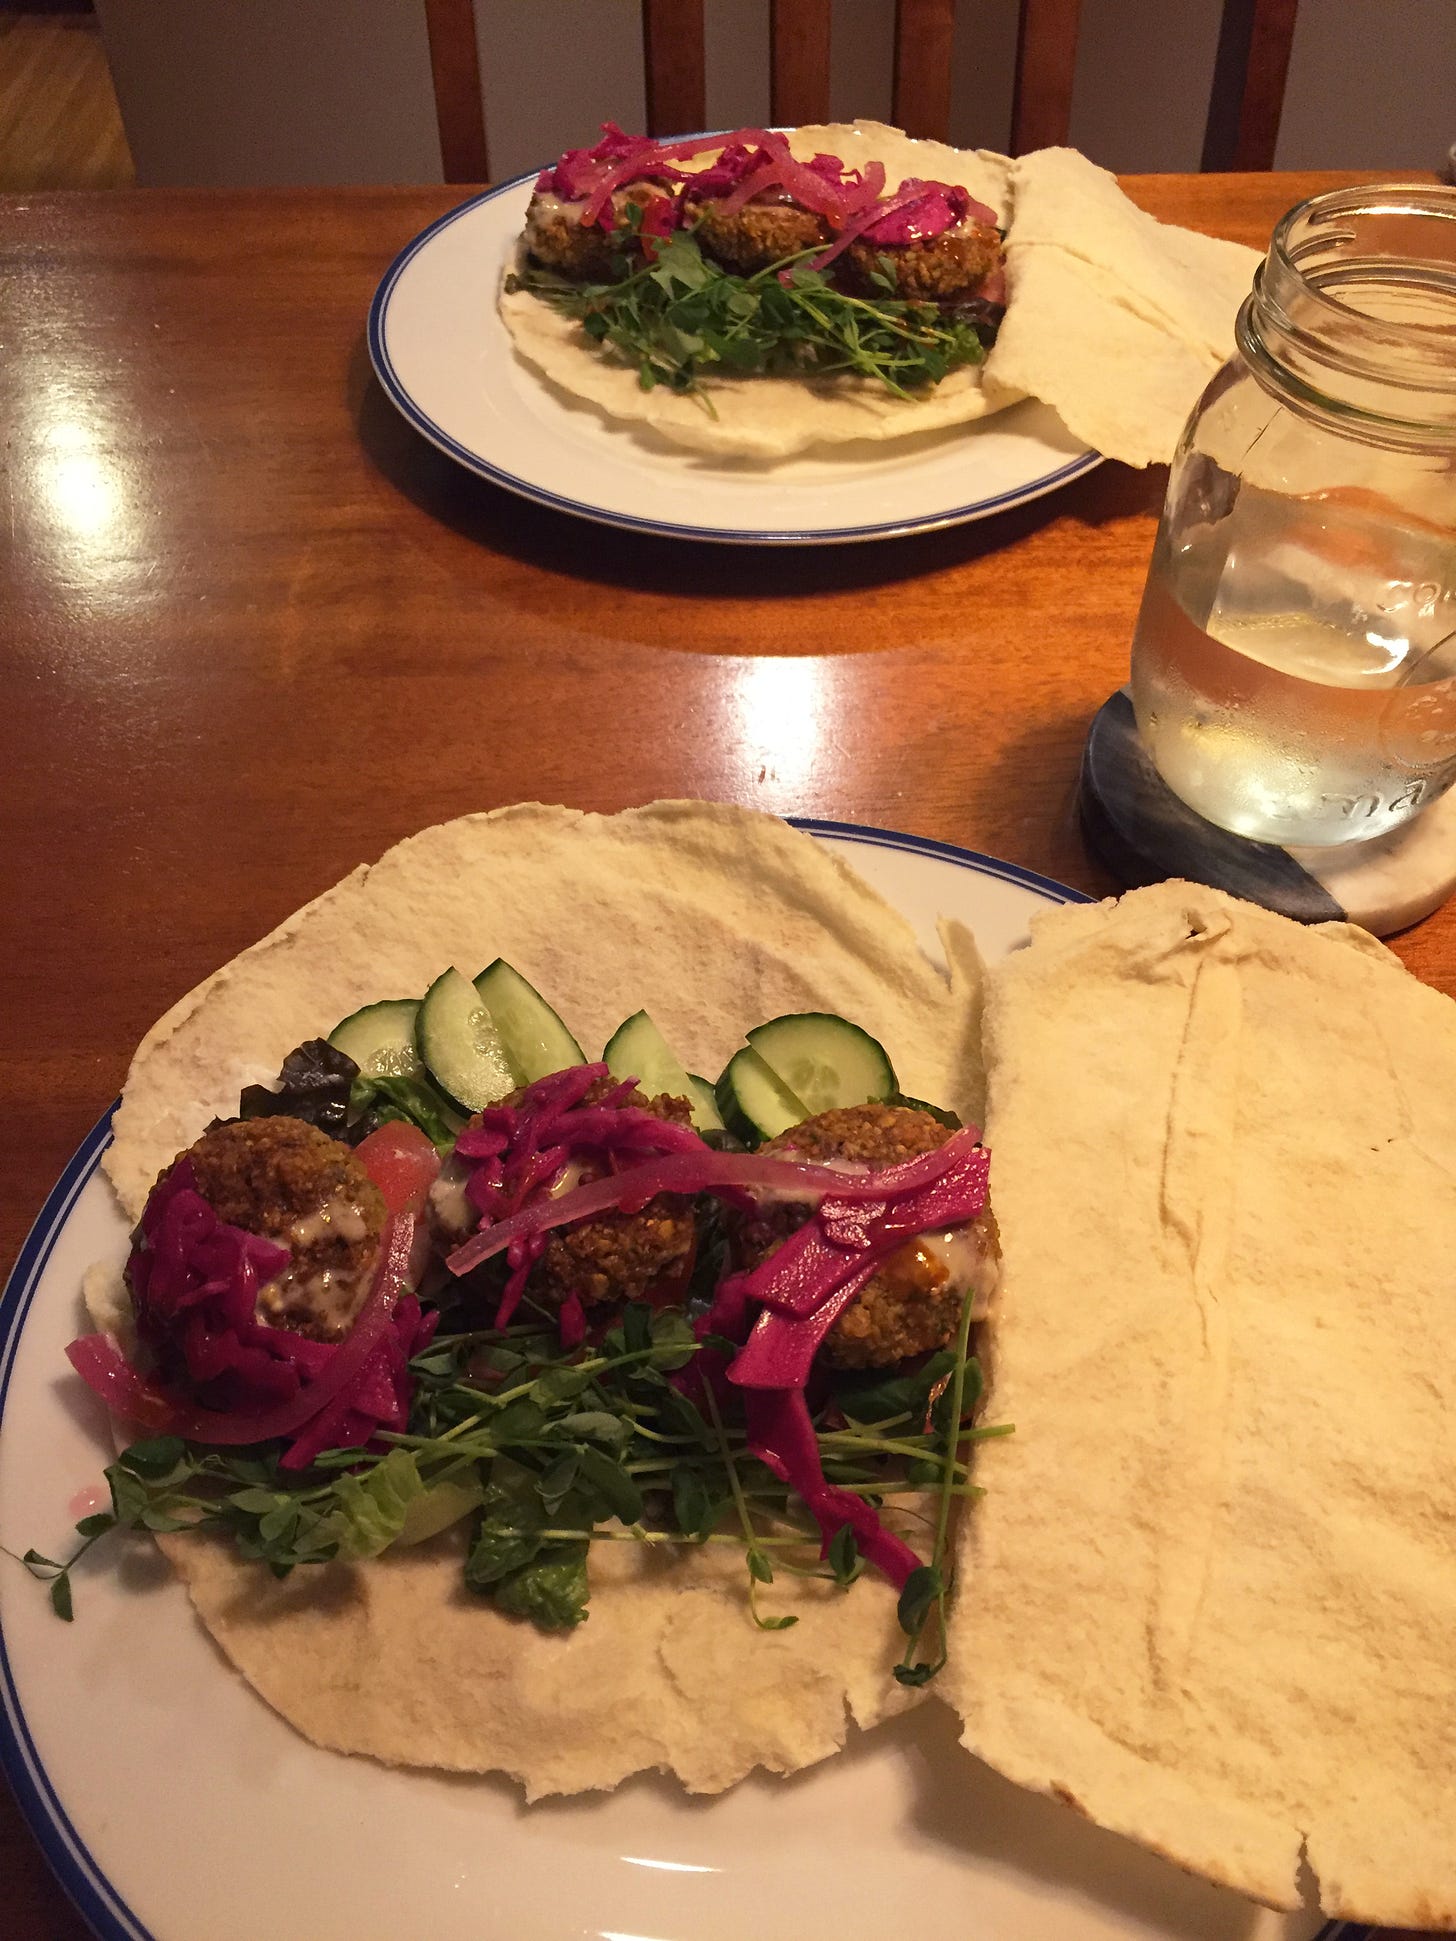 Two plates across from each other, each with an open pita full of vegetables, pink pickled onions & cabbage, three falafel patties, and a drizzle of tahini sauce.